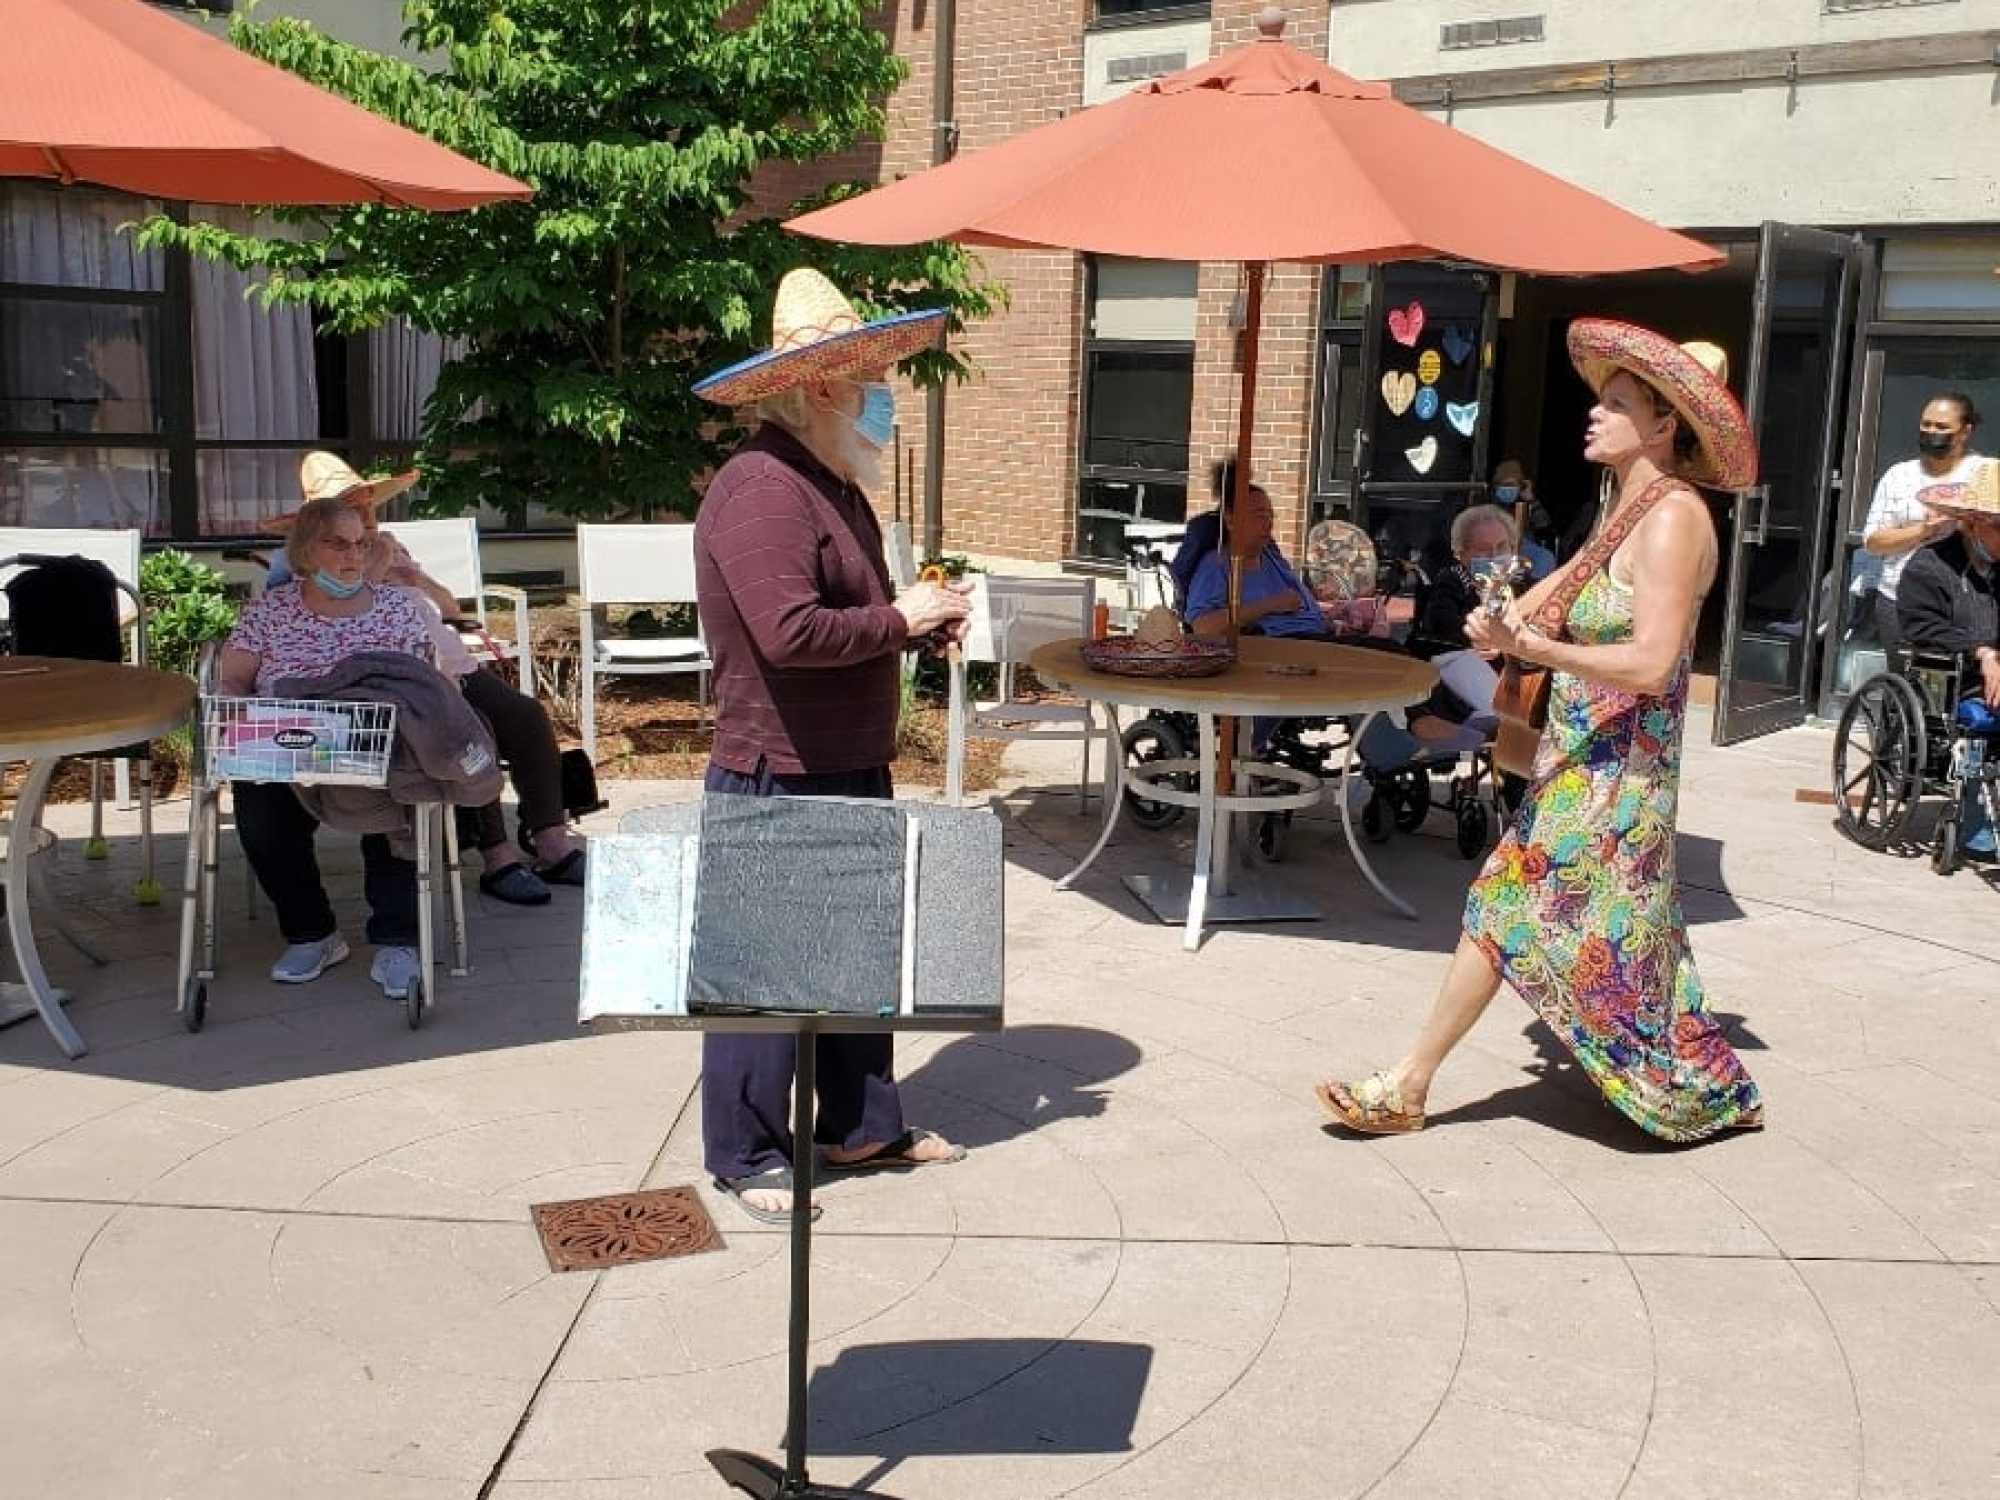 July Music and Dancing with one of our favorite performers, Lisa Pernice.